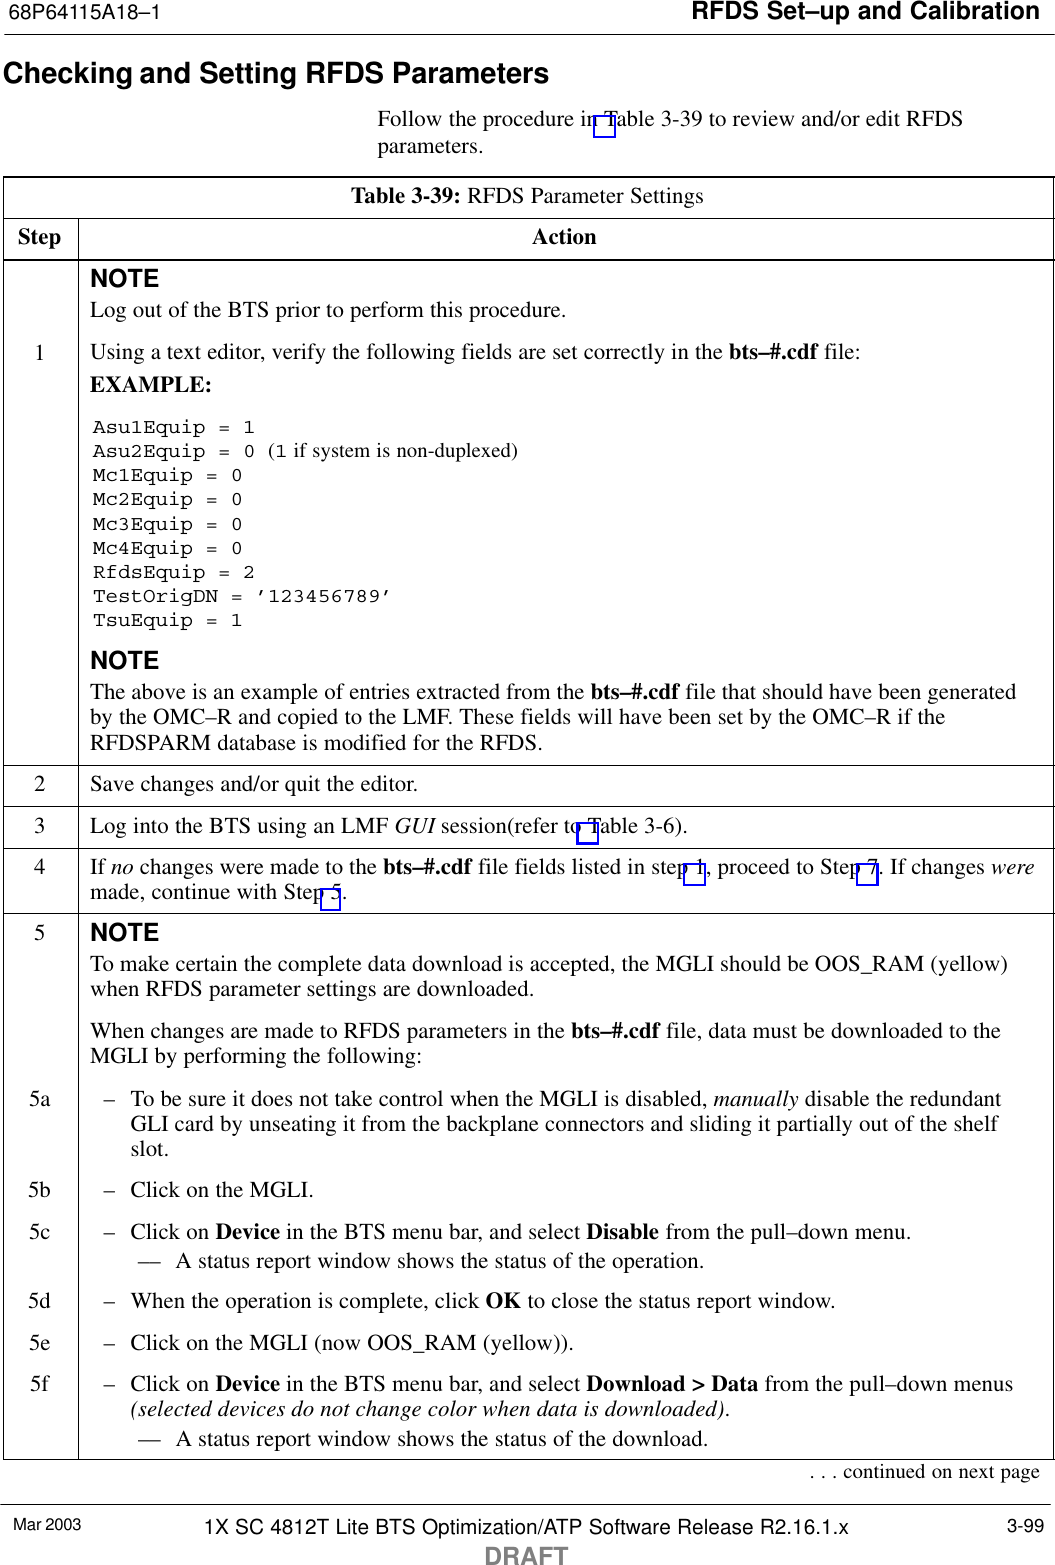 RFDS Set–up and Calibration68P64115A18–1Mar 2003 1X SC 4812T Lite BTS Optimization/ATP Software Release R2.16.1.xDRAFT3-99Checking and Setting RFDS ParametersFollow the procedure in Table 3-39 to review and/or edit RFDSparameters.Table 3-39: RFDS Parameter SettingsStep ActionNOTELog out of the BTS prior to perform this procedure.1Using a text editor, verify the following fields are set correctly in the bts–#.cdf file:EXAMPLE:Asu1Equip = 1Asu2Equip = 0 (1 if system is non-duplexed)Mc1Equip = 0Mc2Equip = 0Mc3Equip = 0Mc4Equip = 0RfdsEquip = 2TestOrigDN = ’123456789’TsuEquip = 1NOTEThe above is an example of entries extracted from the bts–#.cdf file that should have been generatedby the OMC–R and copied to the LMF. These fields will have been set by the OMC–R if theRFDSPARM database is modified for the RFDS.2Save changes and/or quit the editor.3Log into the BTS using an LMF GUI session(refer to Table 3-6).4 If no changes were made to the bts–#.cdf file fields listed in step 1, proceed to Step 7. If changes weremade, continue with Step 5.5NOTETo make certain the complete data download is accepted, the MGLI should be OOS_RAM (yellow)when RFDS parameter settings are downloaded.When changes are made to RFDS parameters in the bts–#.cdf file, data must be downloaded to theMGLI by performing the following:5a – To be sure it does not take control when the MGLI is disabled, manually disable the redundantGLI card by unseating it from the backplane connectors and sliding it partially out of the shelfslot.5b – Click on the MGLI.5c – Click on Device in the BTS menu bar, and select Disable from the pull–down menu.–– A status report window shows the status of the operation.5d – When the operation is complete, click OK to close the status report window.5e – Click on the MGLI (now OOS_RAM (yellow)).5f – Click on Device in the BTS menu bar, and select Download &gt; Data from the pull–down menus(selected devices do not change color when data is downloaded).–– A status report window shows the status of the download.. . . continued on next page